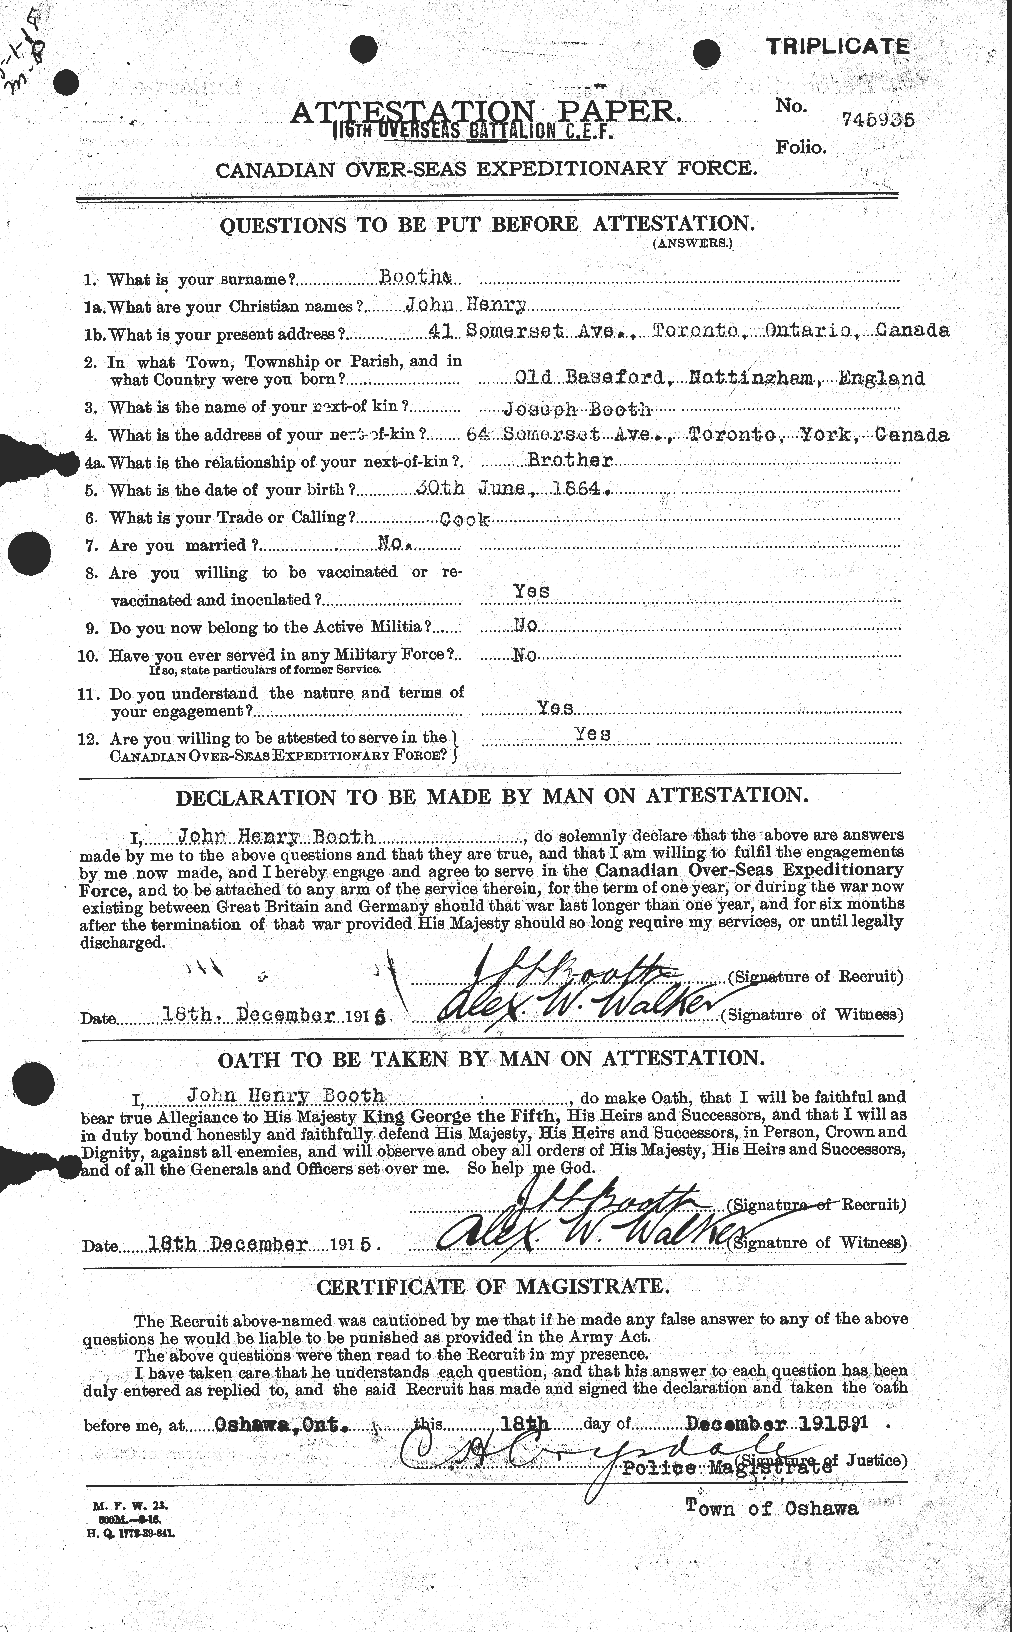 Personnel Records of the First World War - CEF 250926a